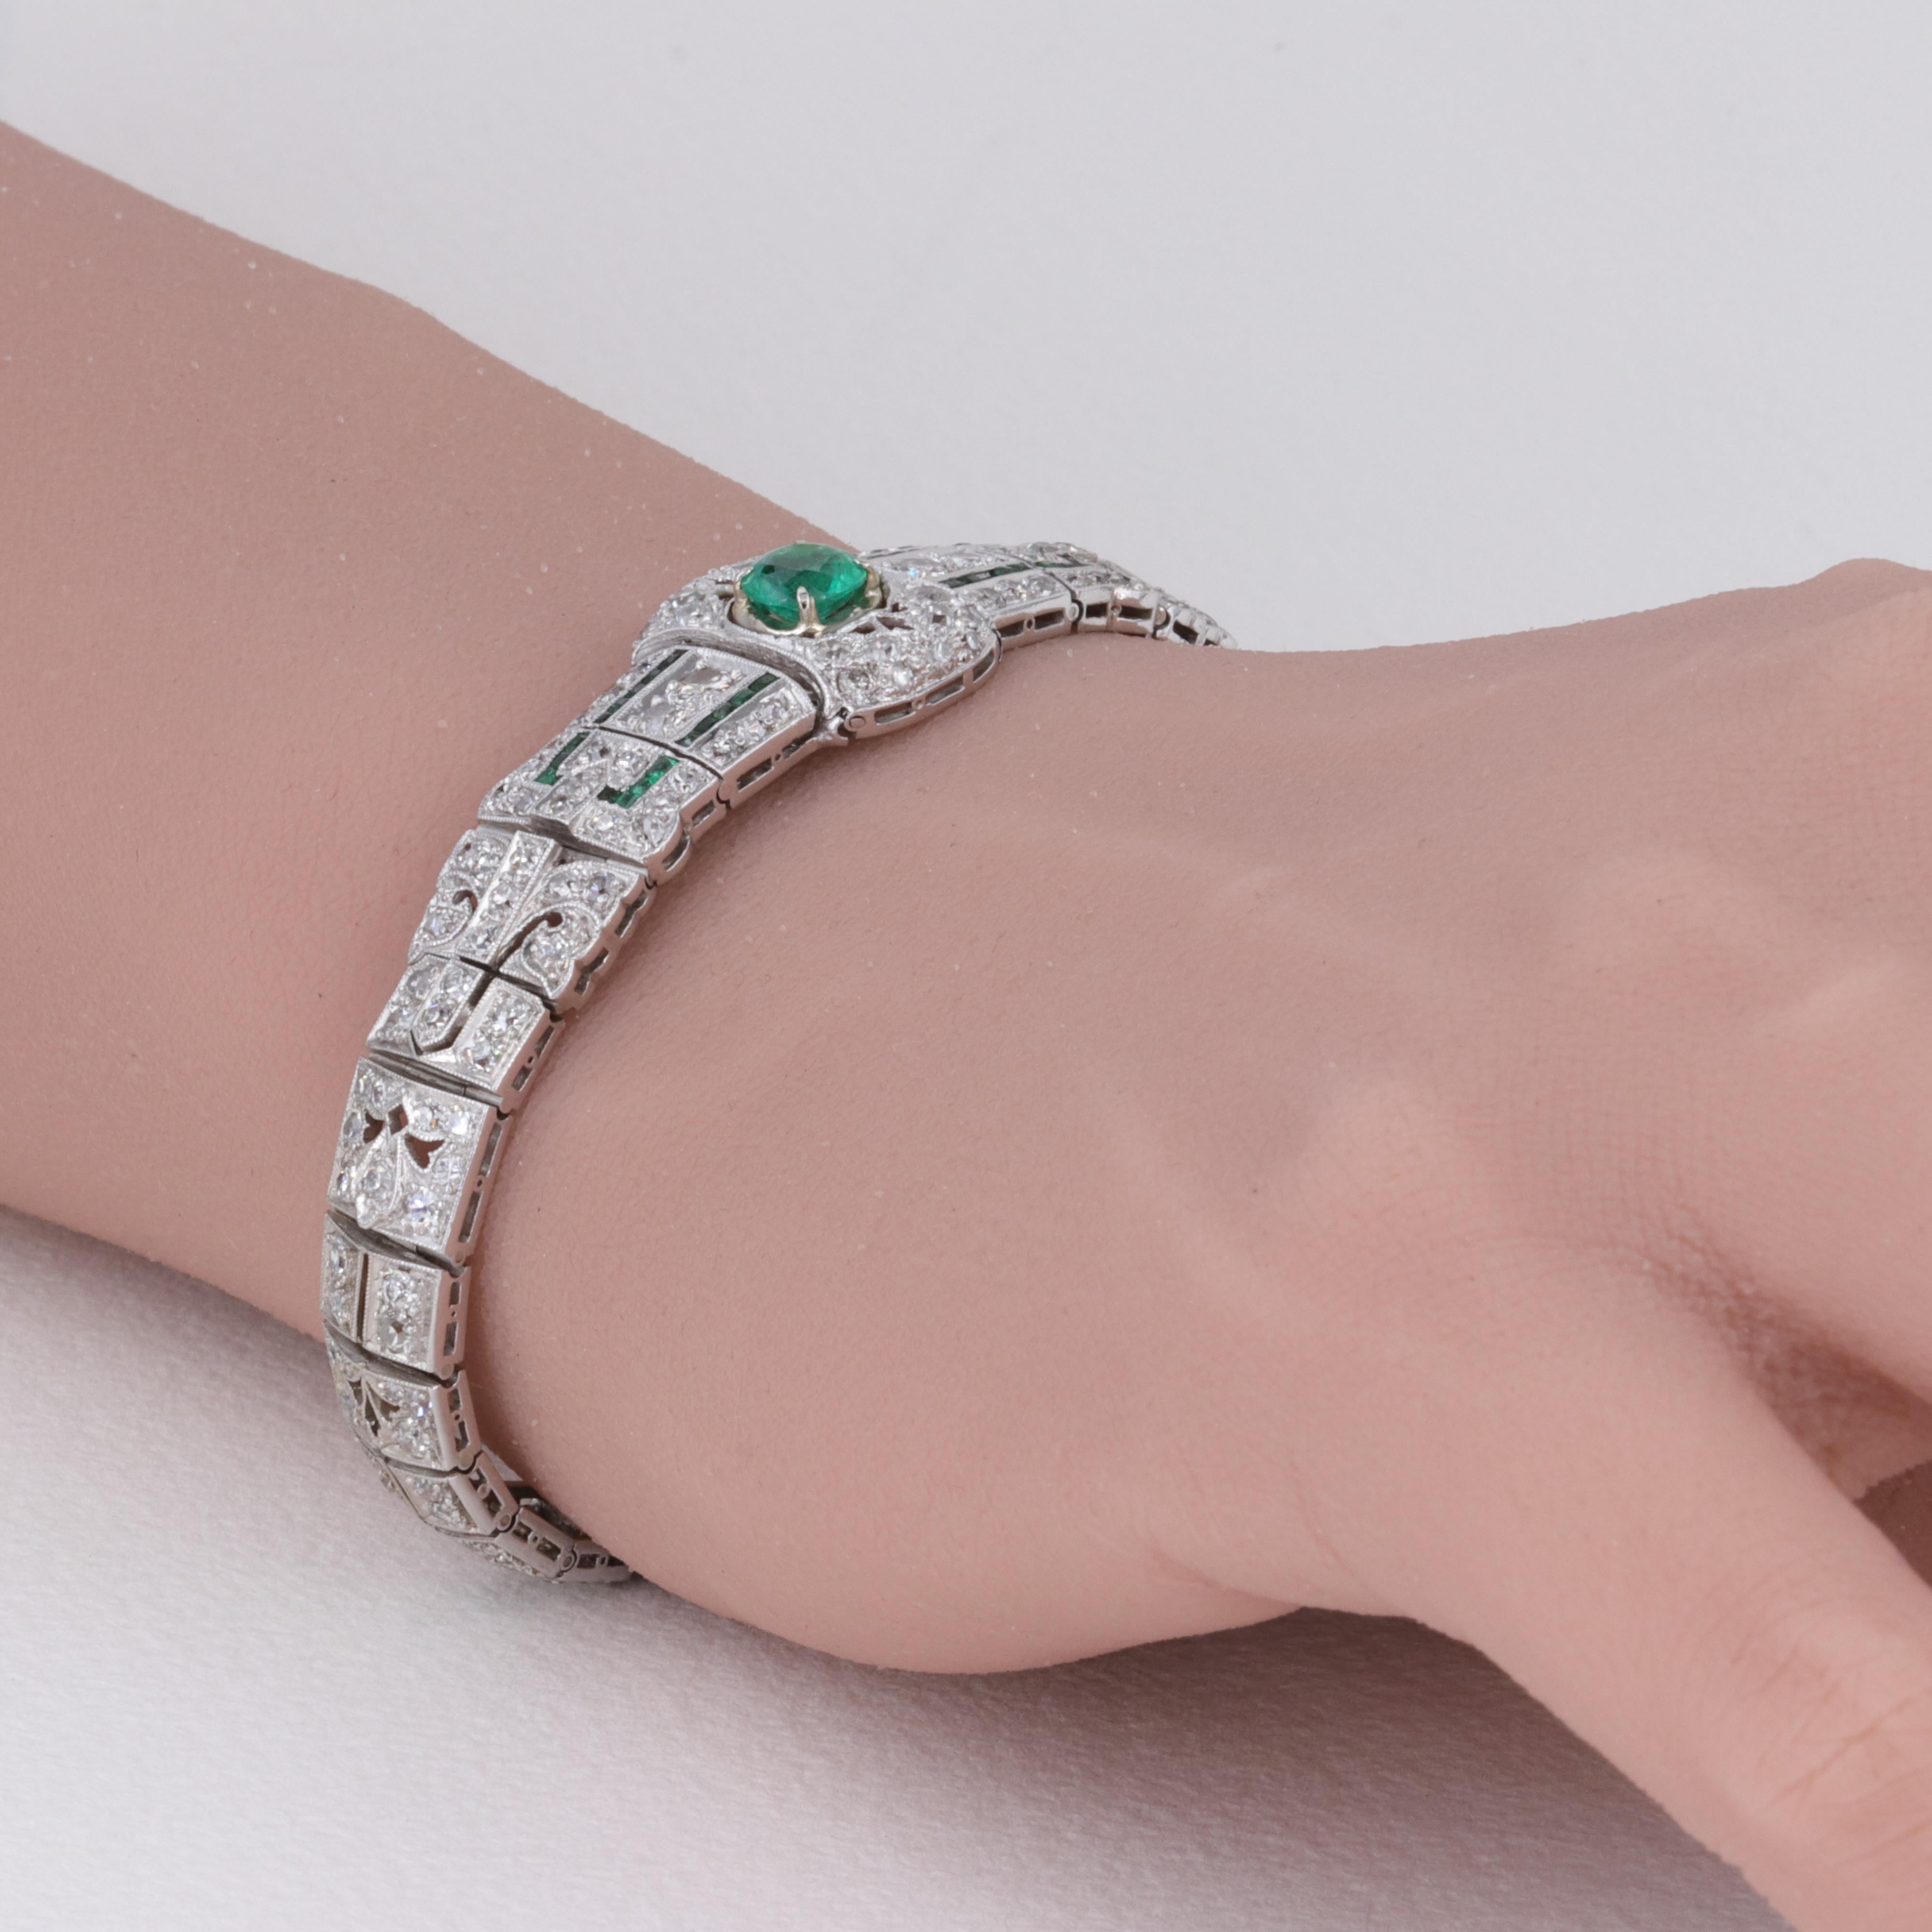 A gorgeous relic of the Art Deco era, this bracelet intricately crafted of platinum features an approximately .70 carat center round emerald with another approximately .20 carats total emerald baguettes and approximately 3.50 carat total weight of